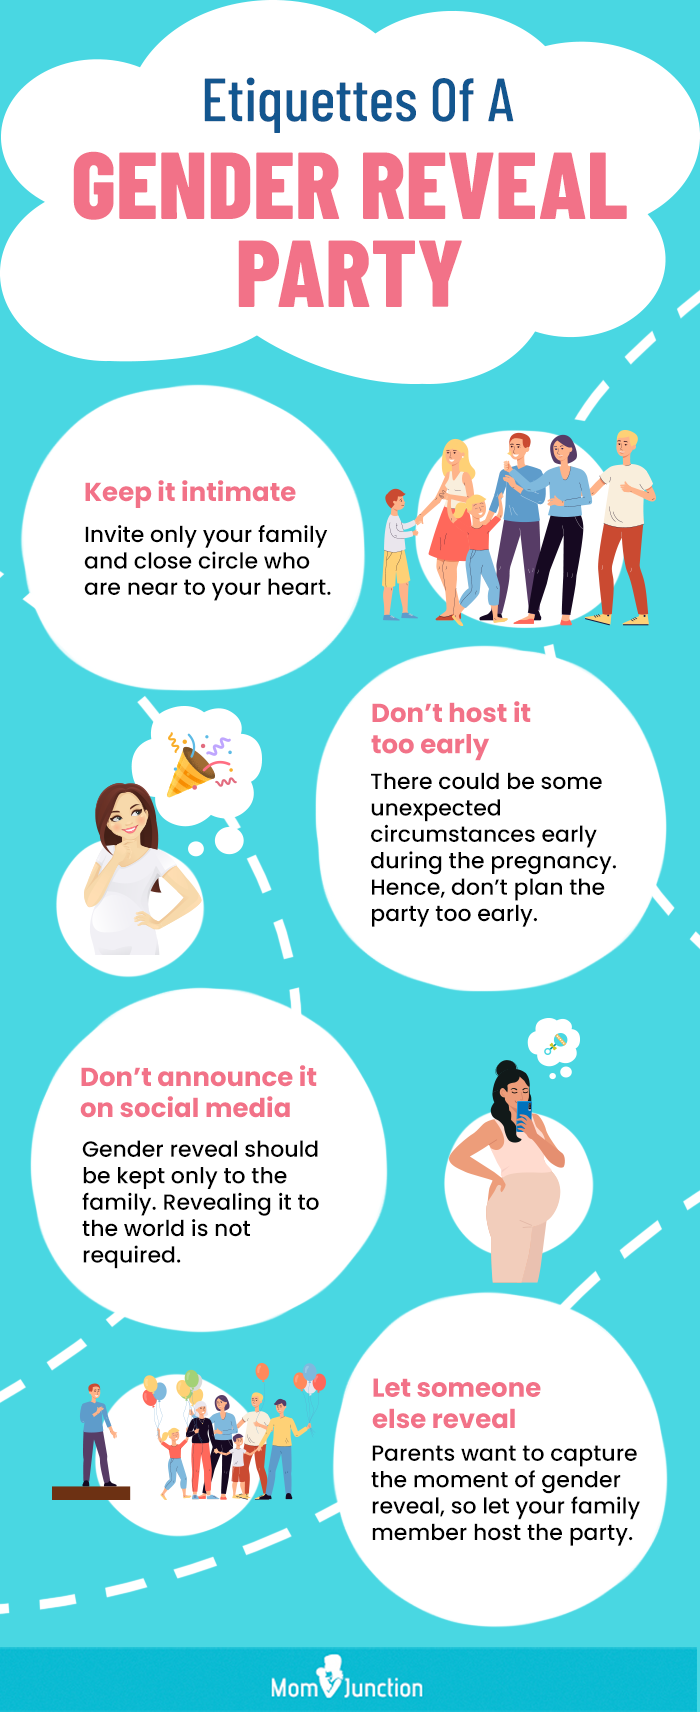 etiquettes of a gender reveal party [infographic]